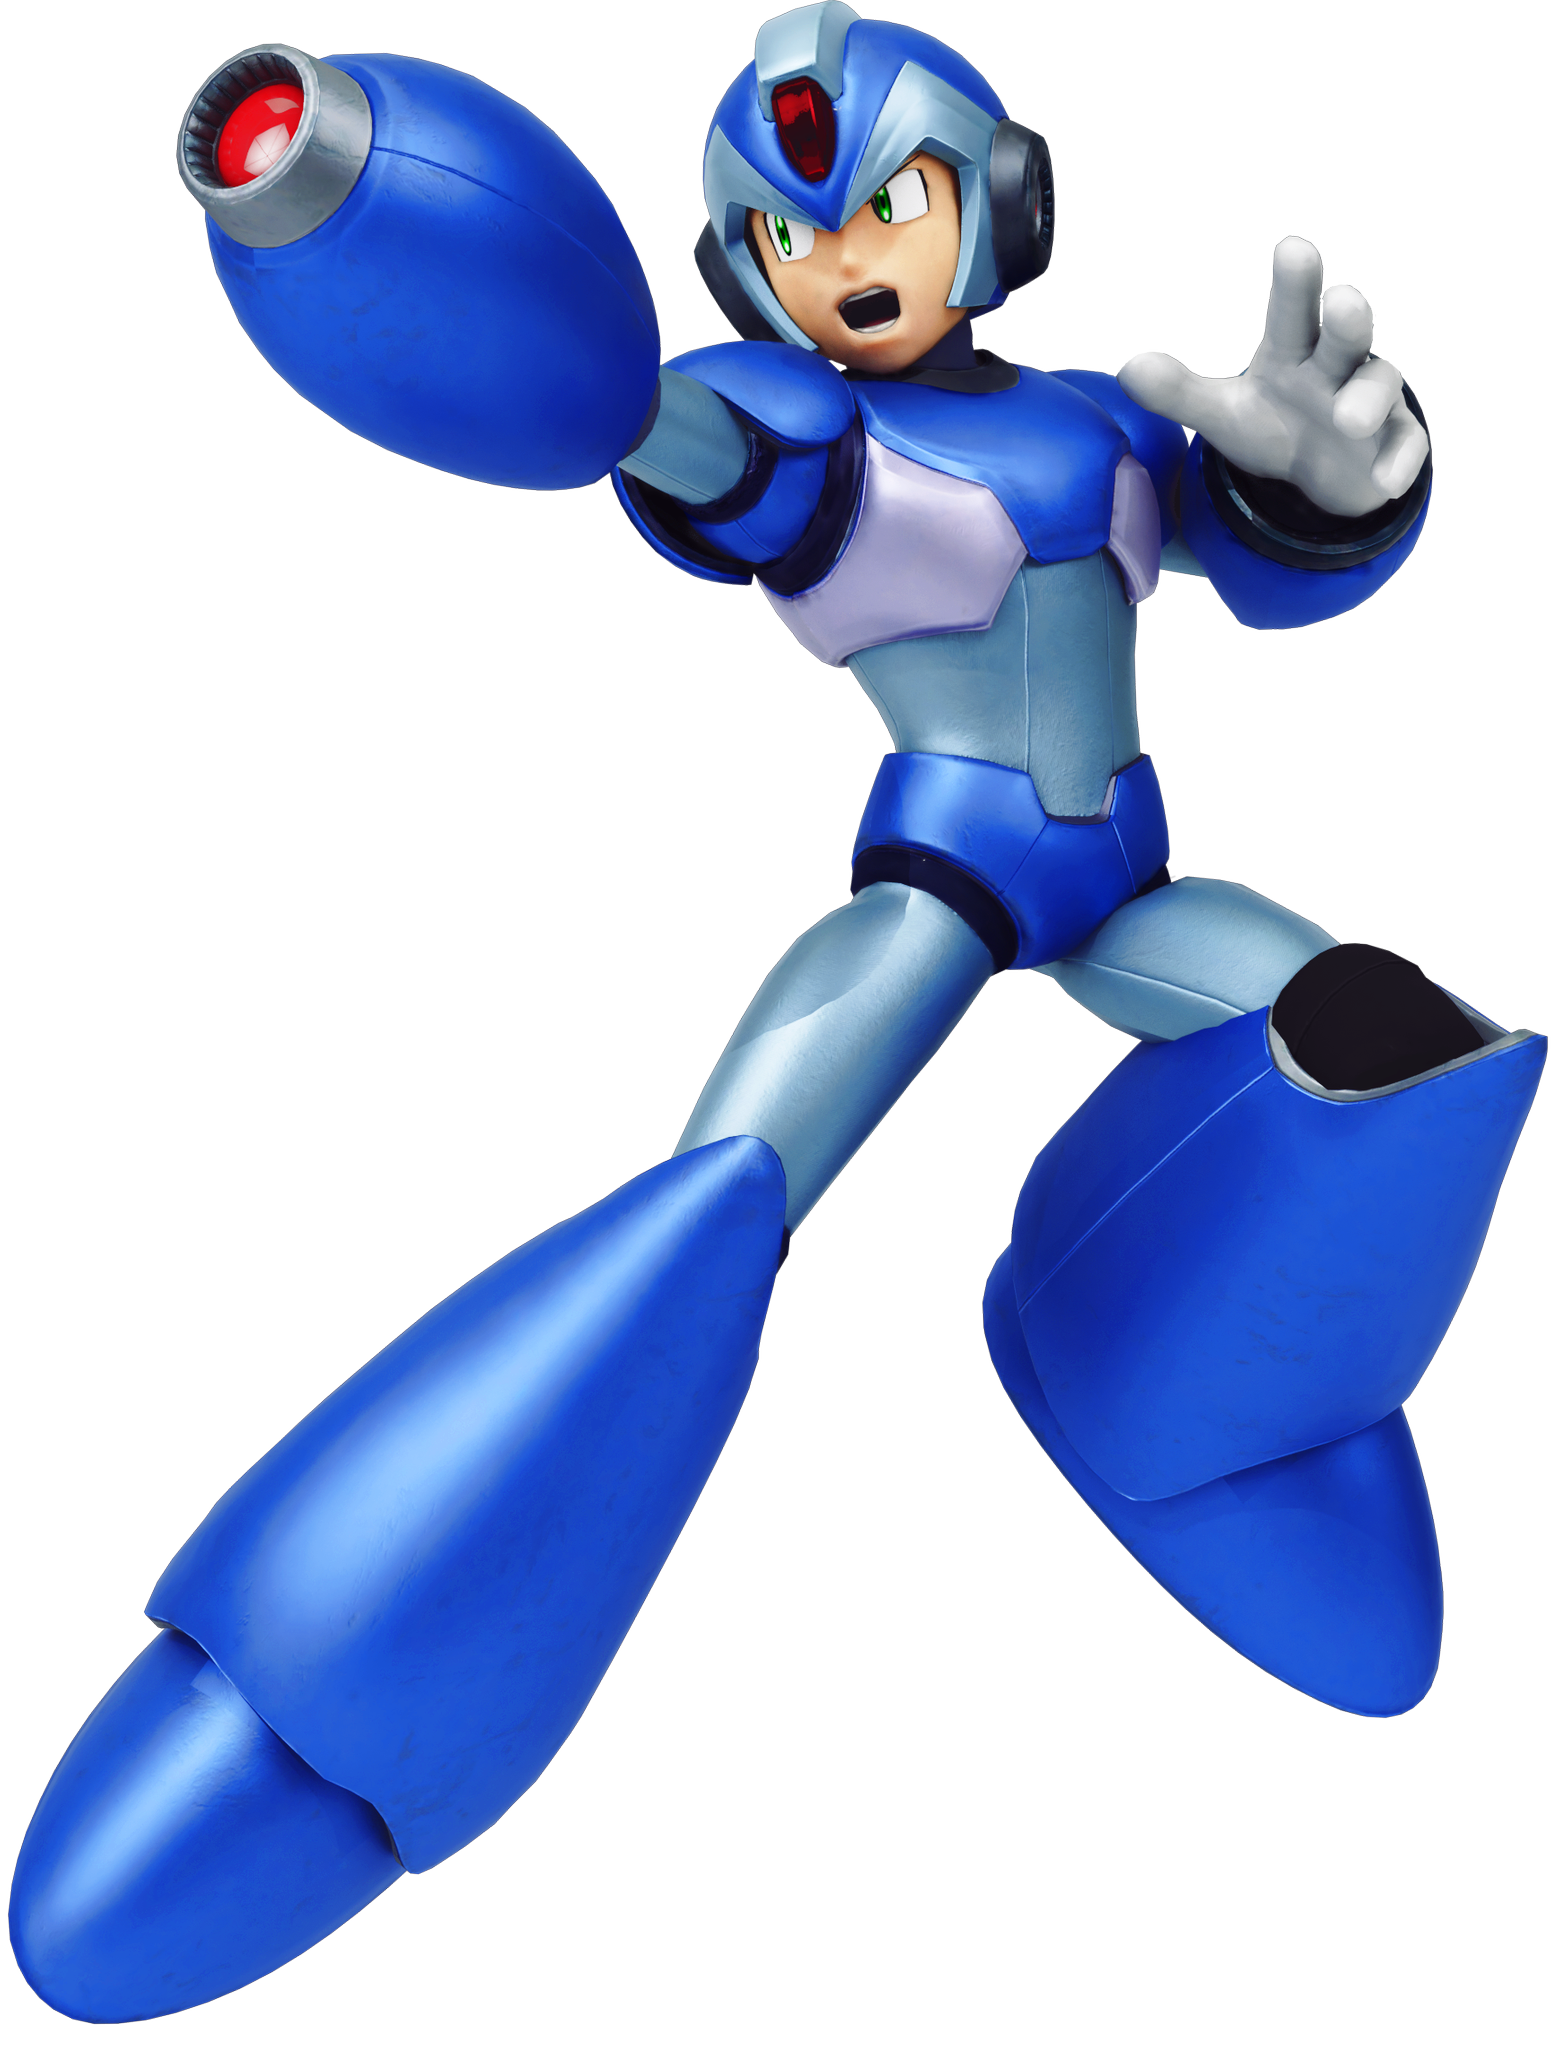 “In celebration for the MegaMan X Legacy Collection here's a render...